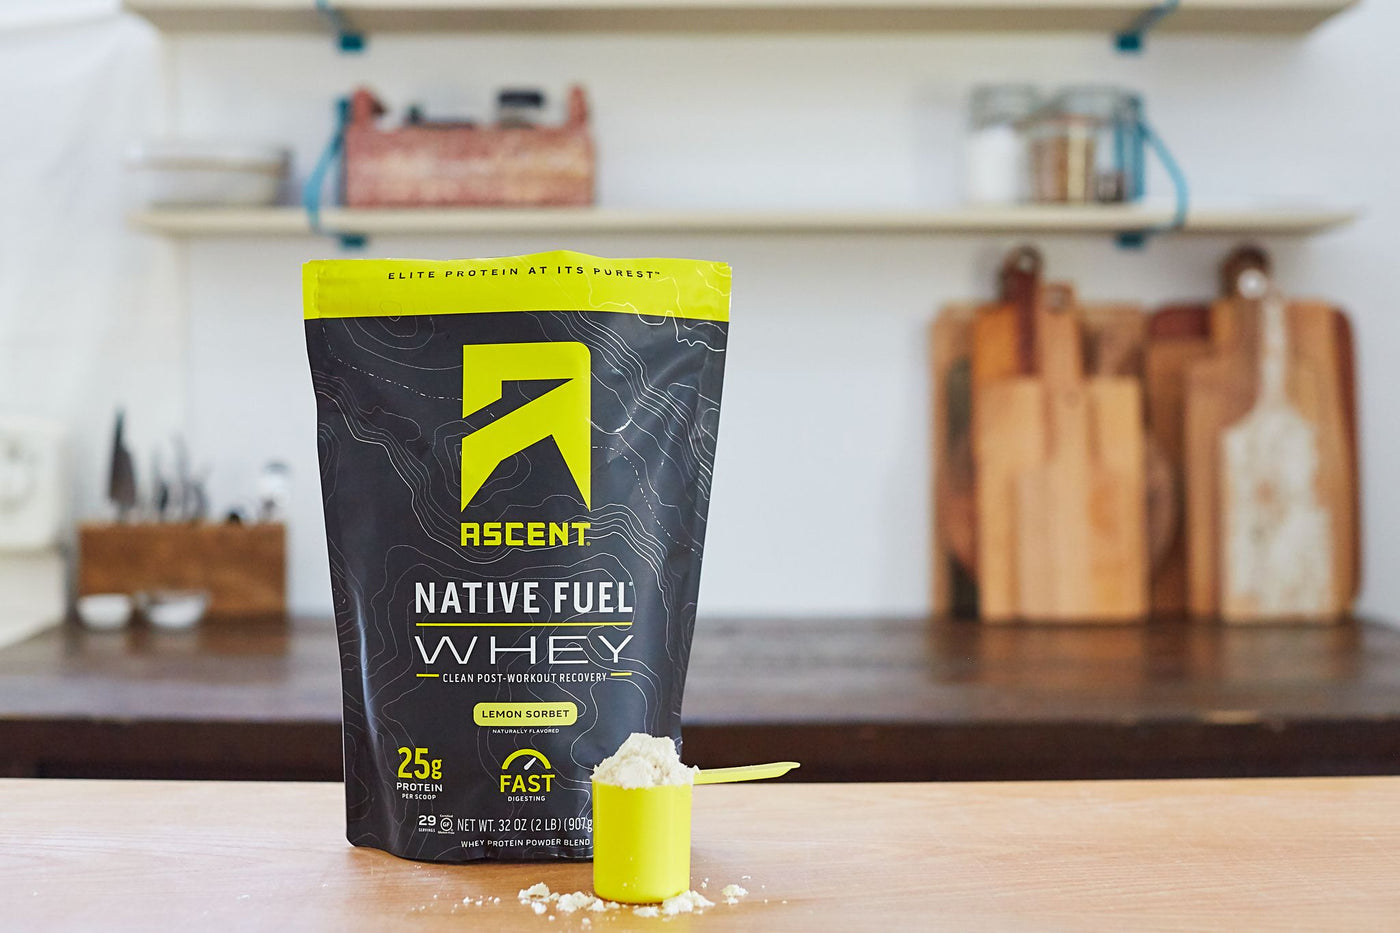 Ascent Native Fuel® Whey Protein Now Available in Sprouts Farmers Market